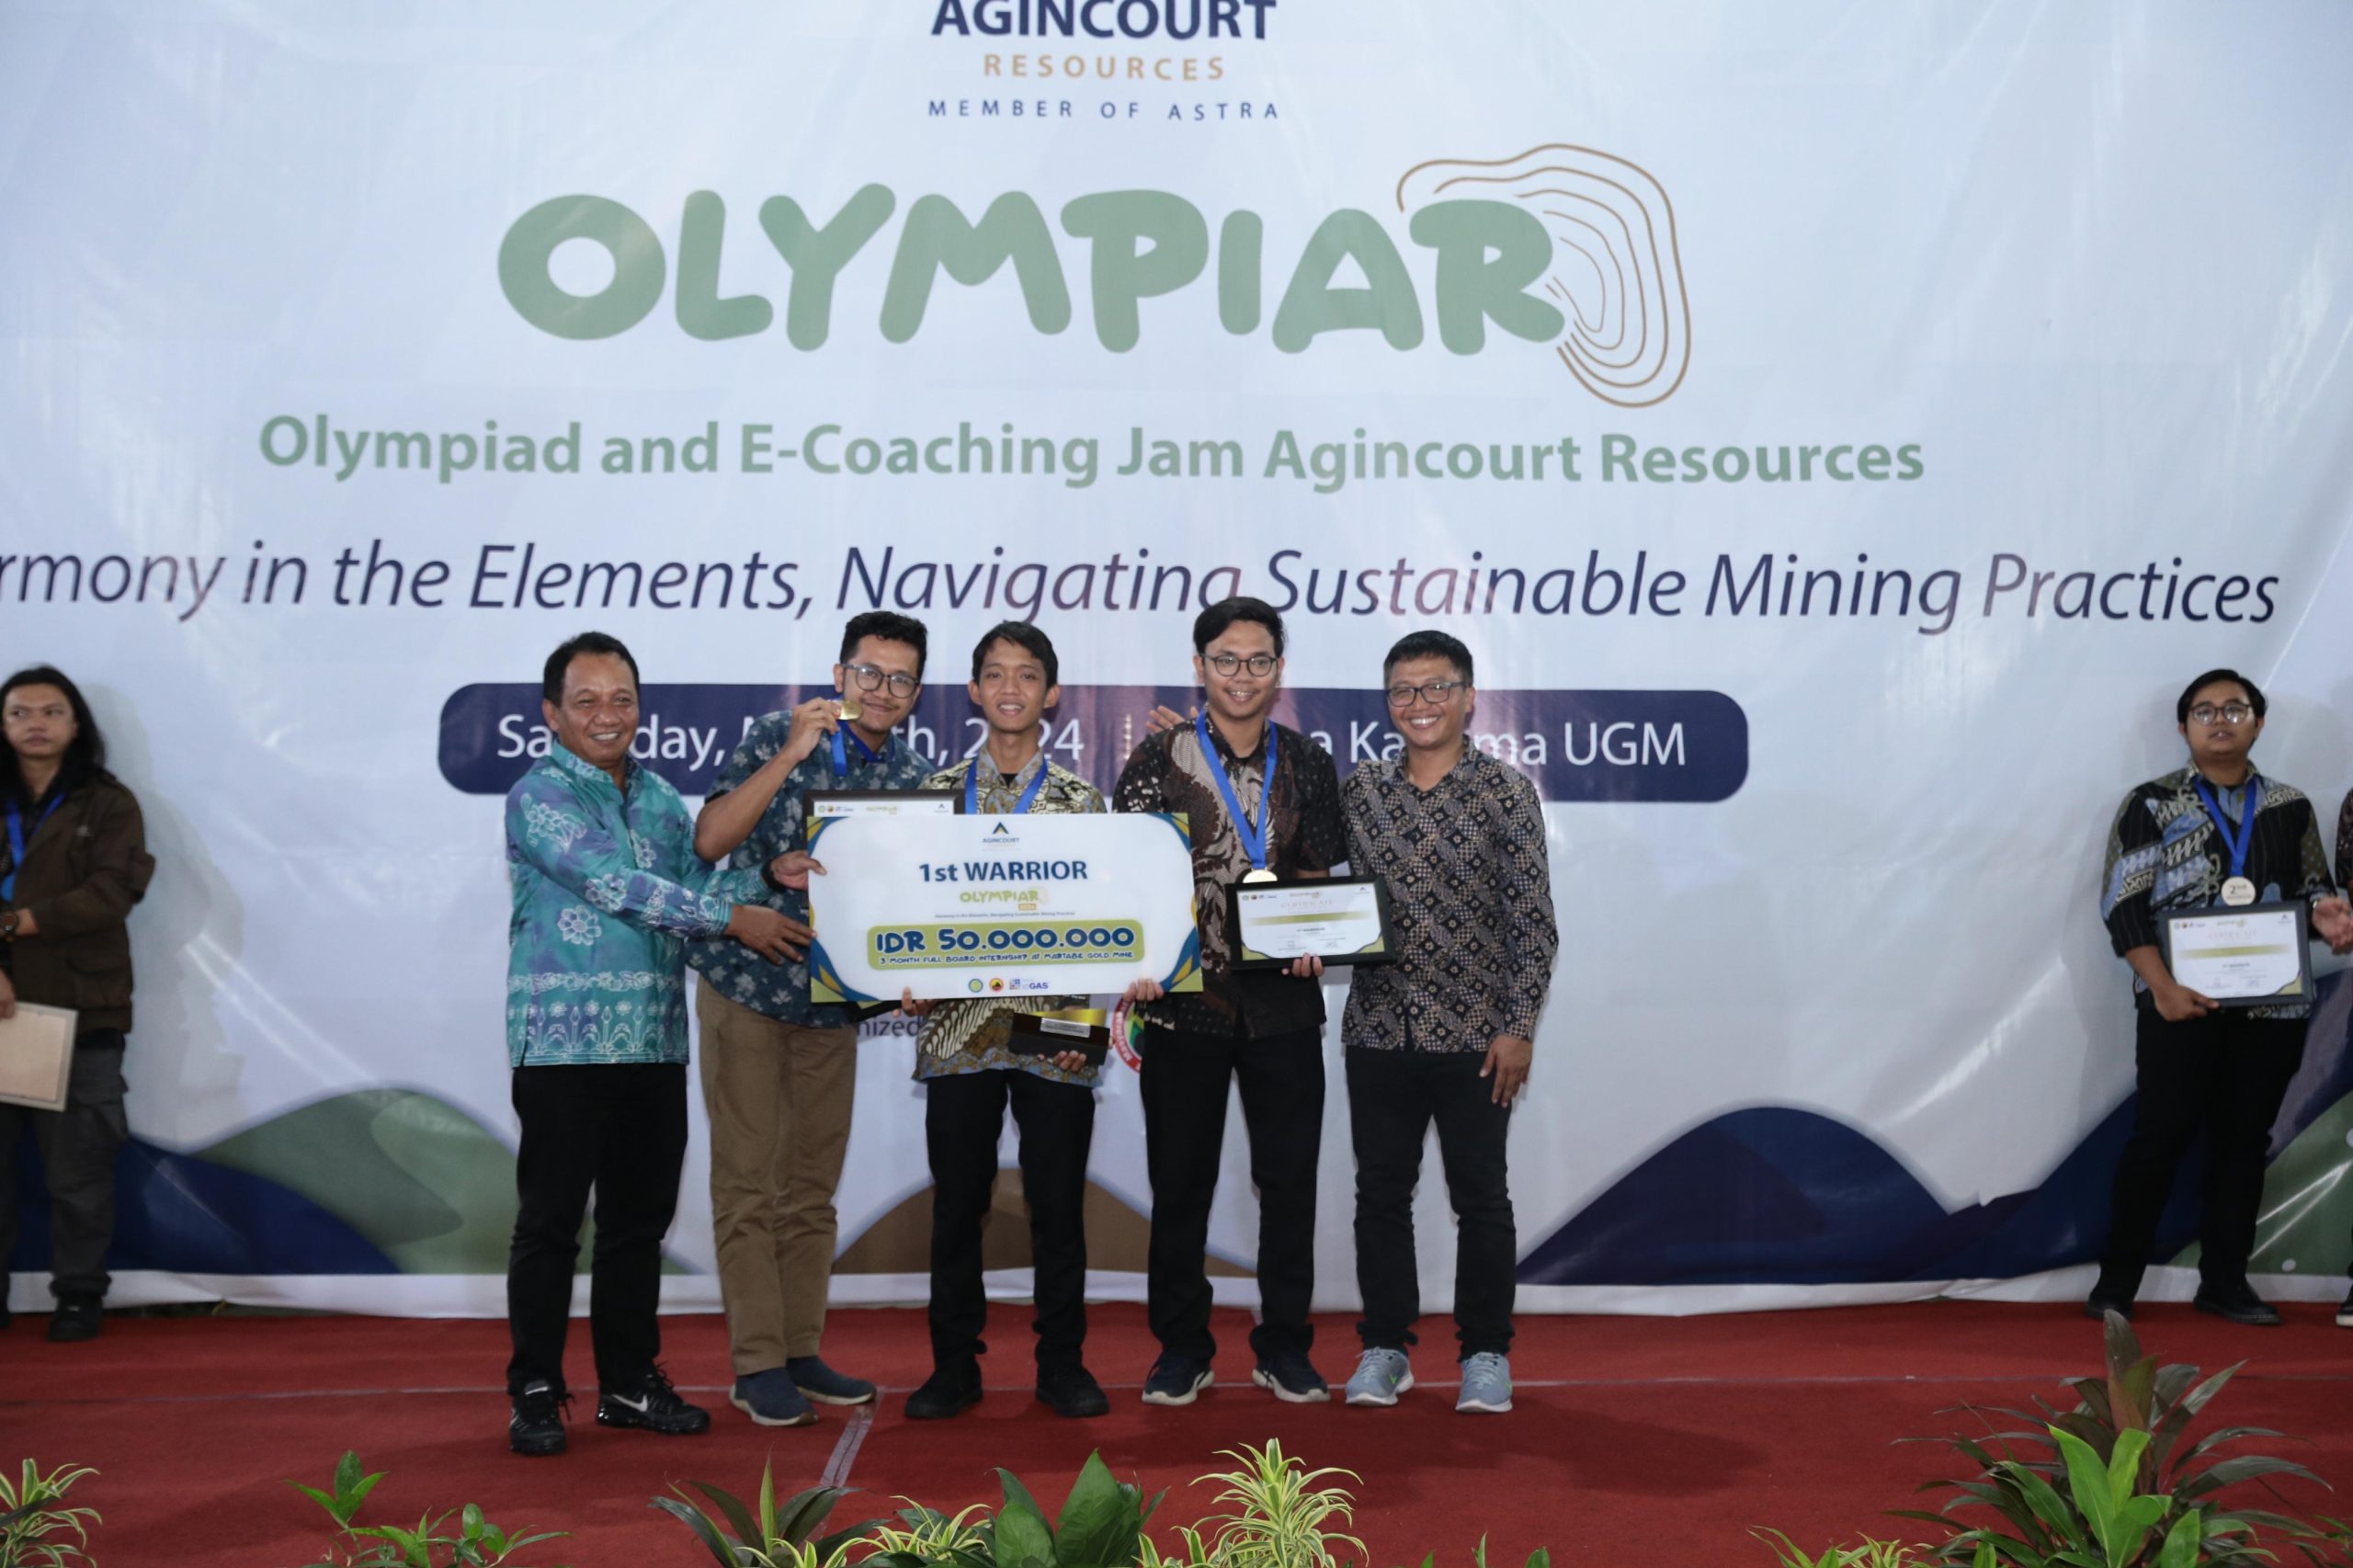 Outperforming Hundreds of Participants from Across Indonesia, Hornblende Team Secures 1st Place in the 2024 Olympiad of Agincourt Resources